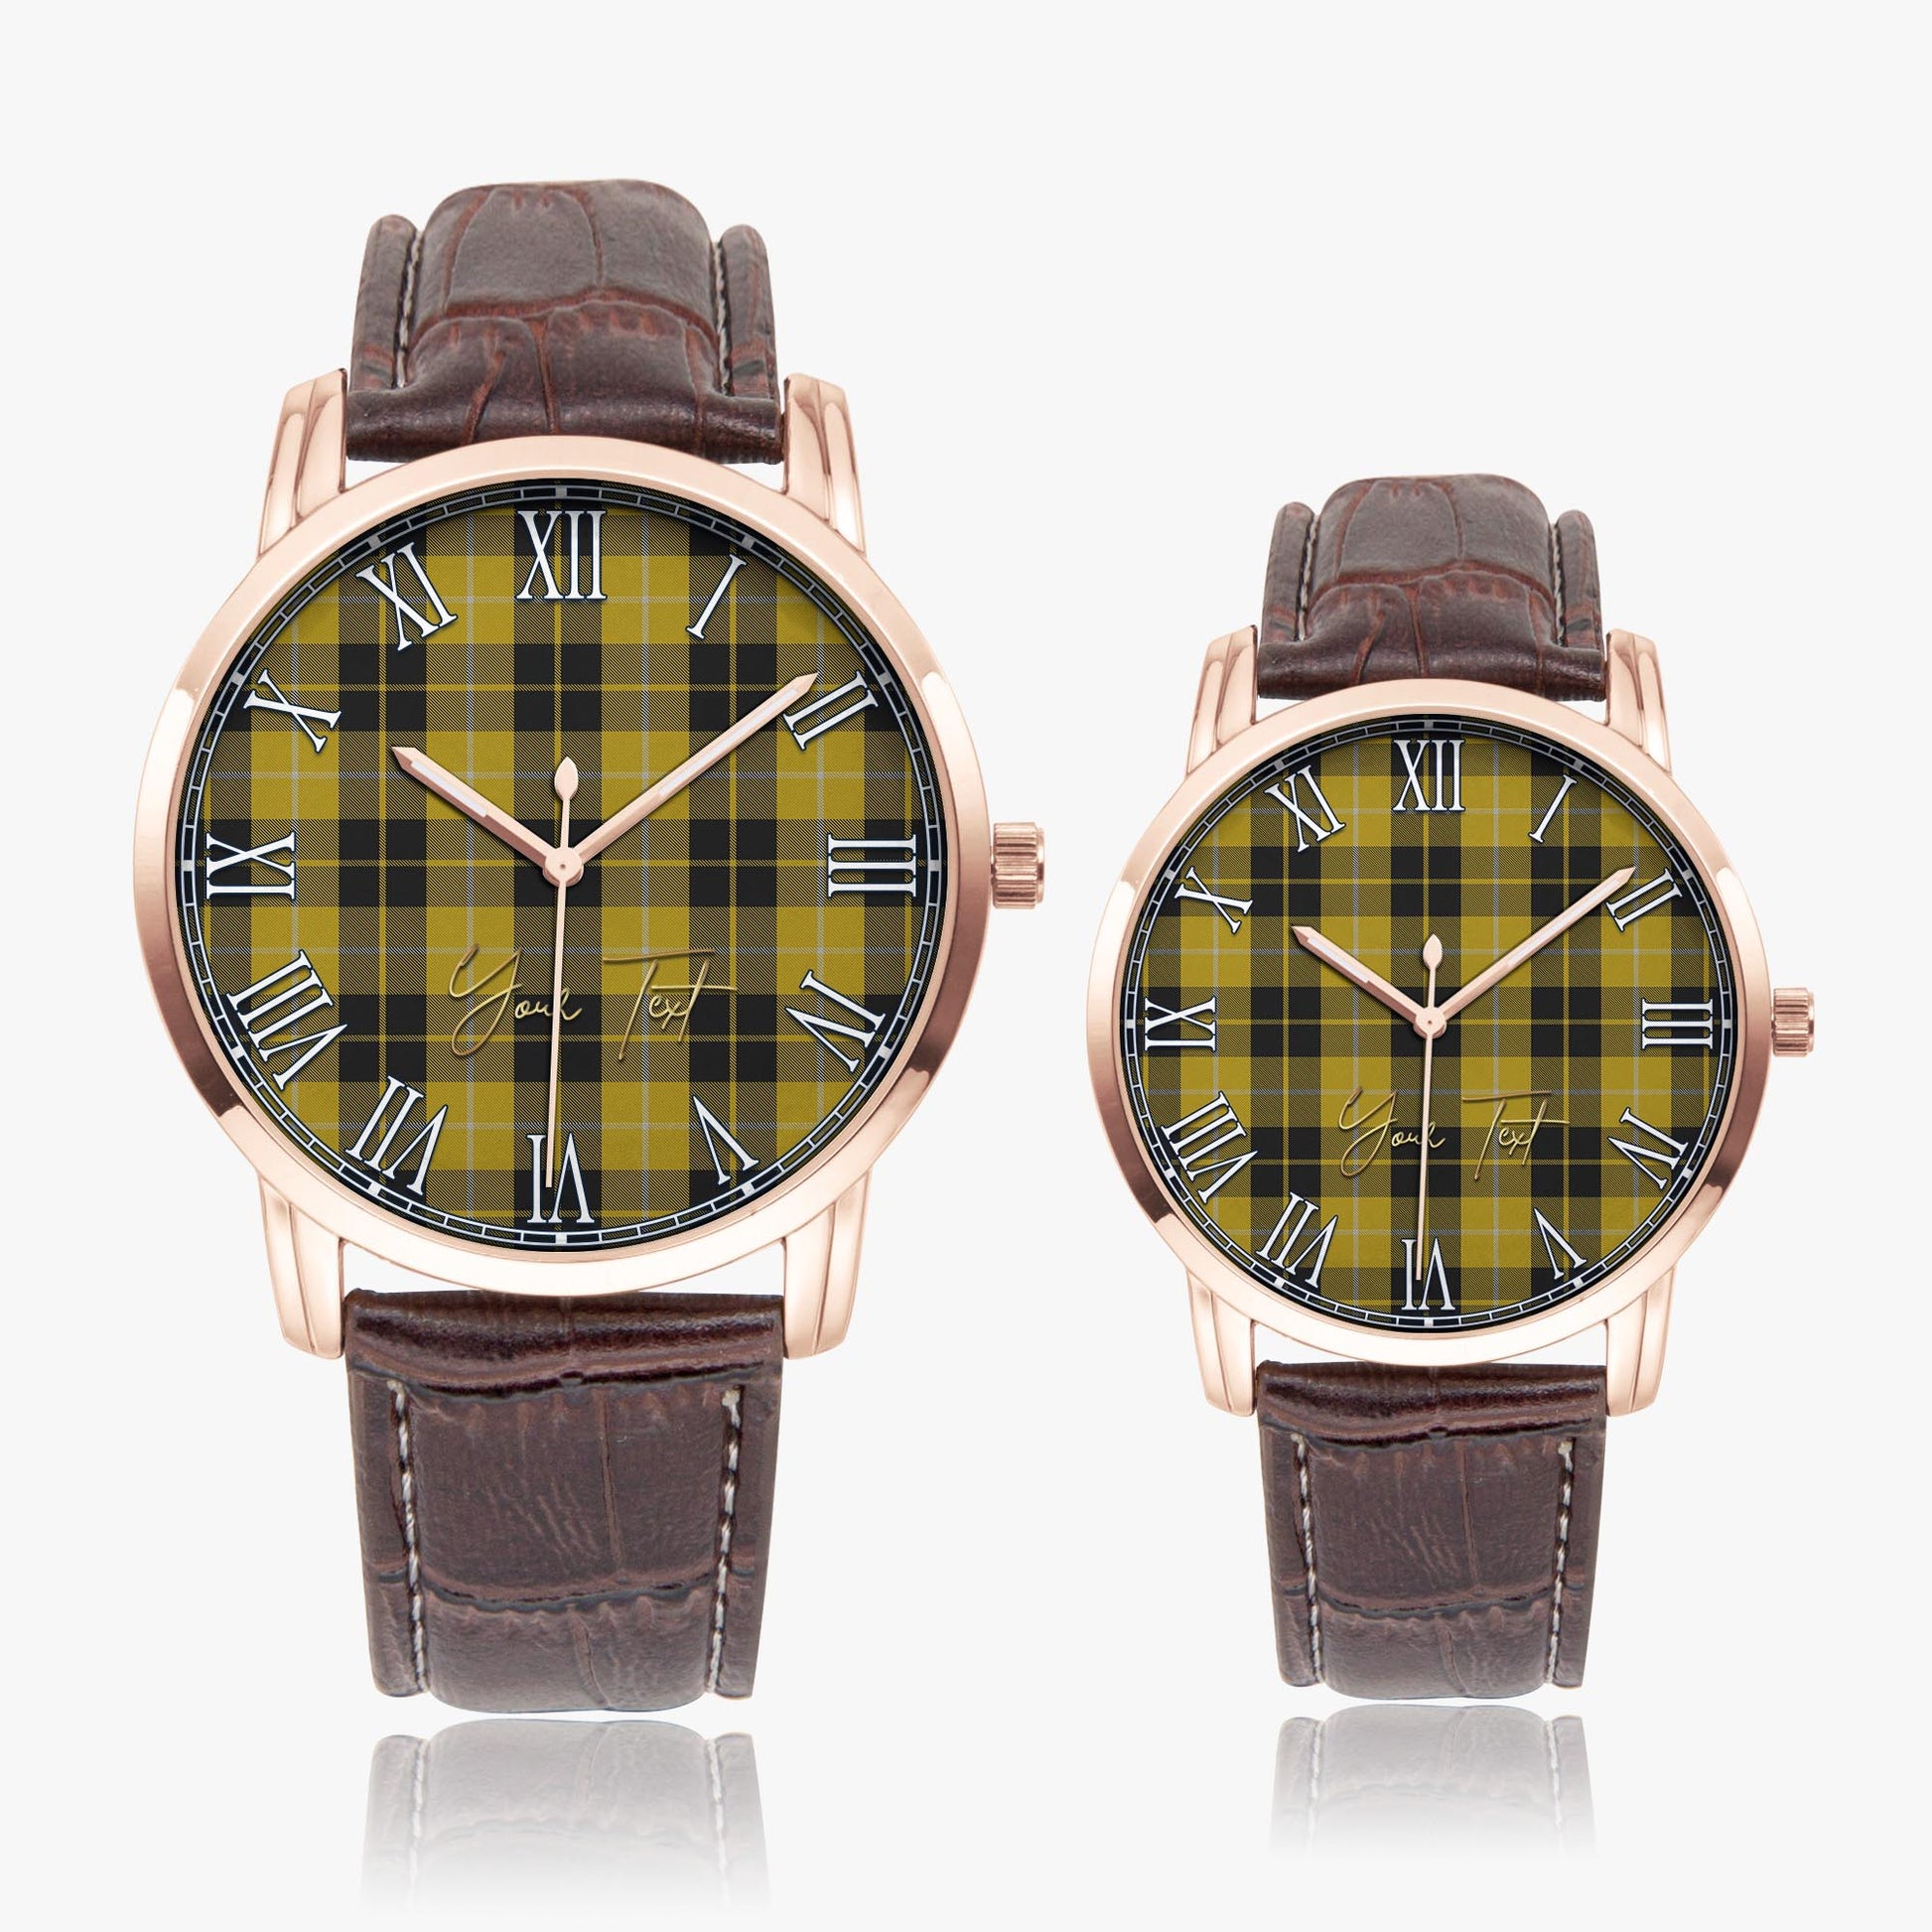 Barclay Dress Tartan Personalized Your Text Leather Trap Quartz Watch Wide Type Rose Gold Case With Brown Leather Strap - Tartanvibesclothing